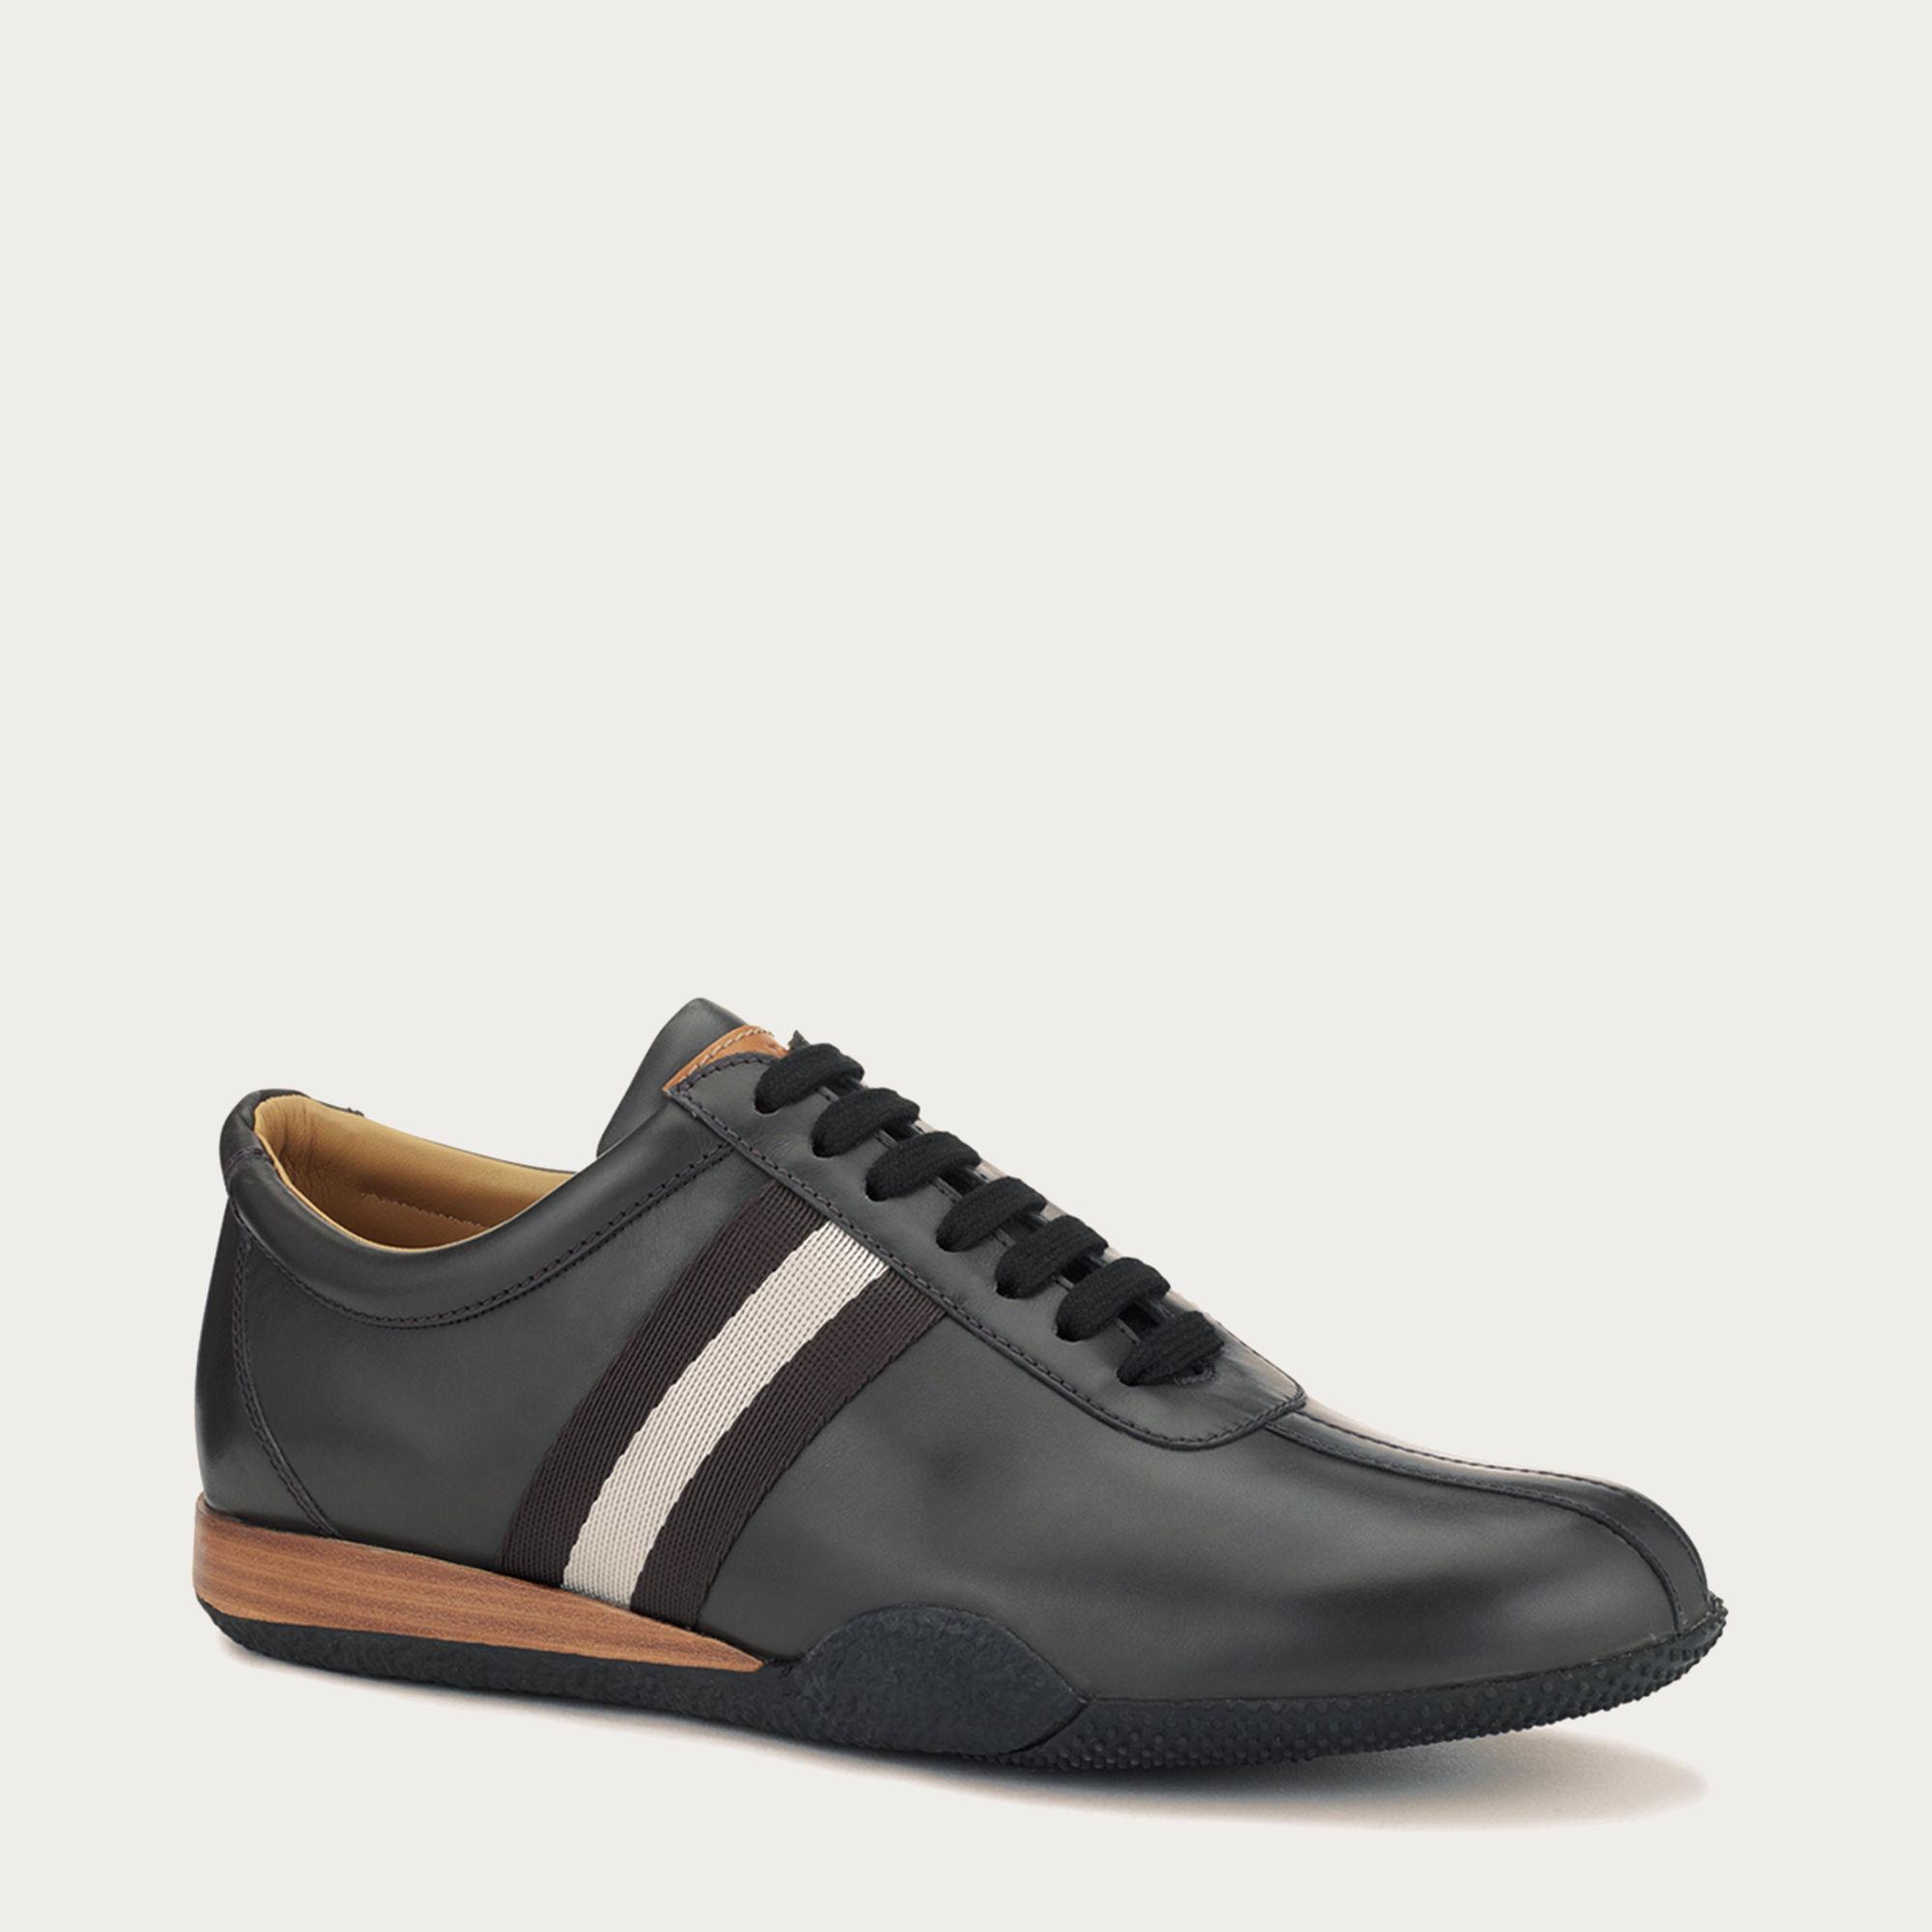 Bally Leather Sneakers Shoes Man in Black for Men - Lyst